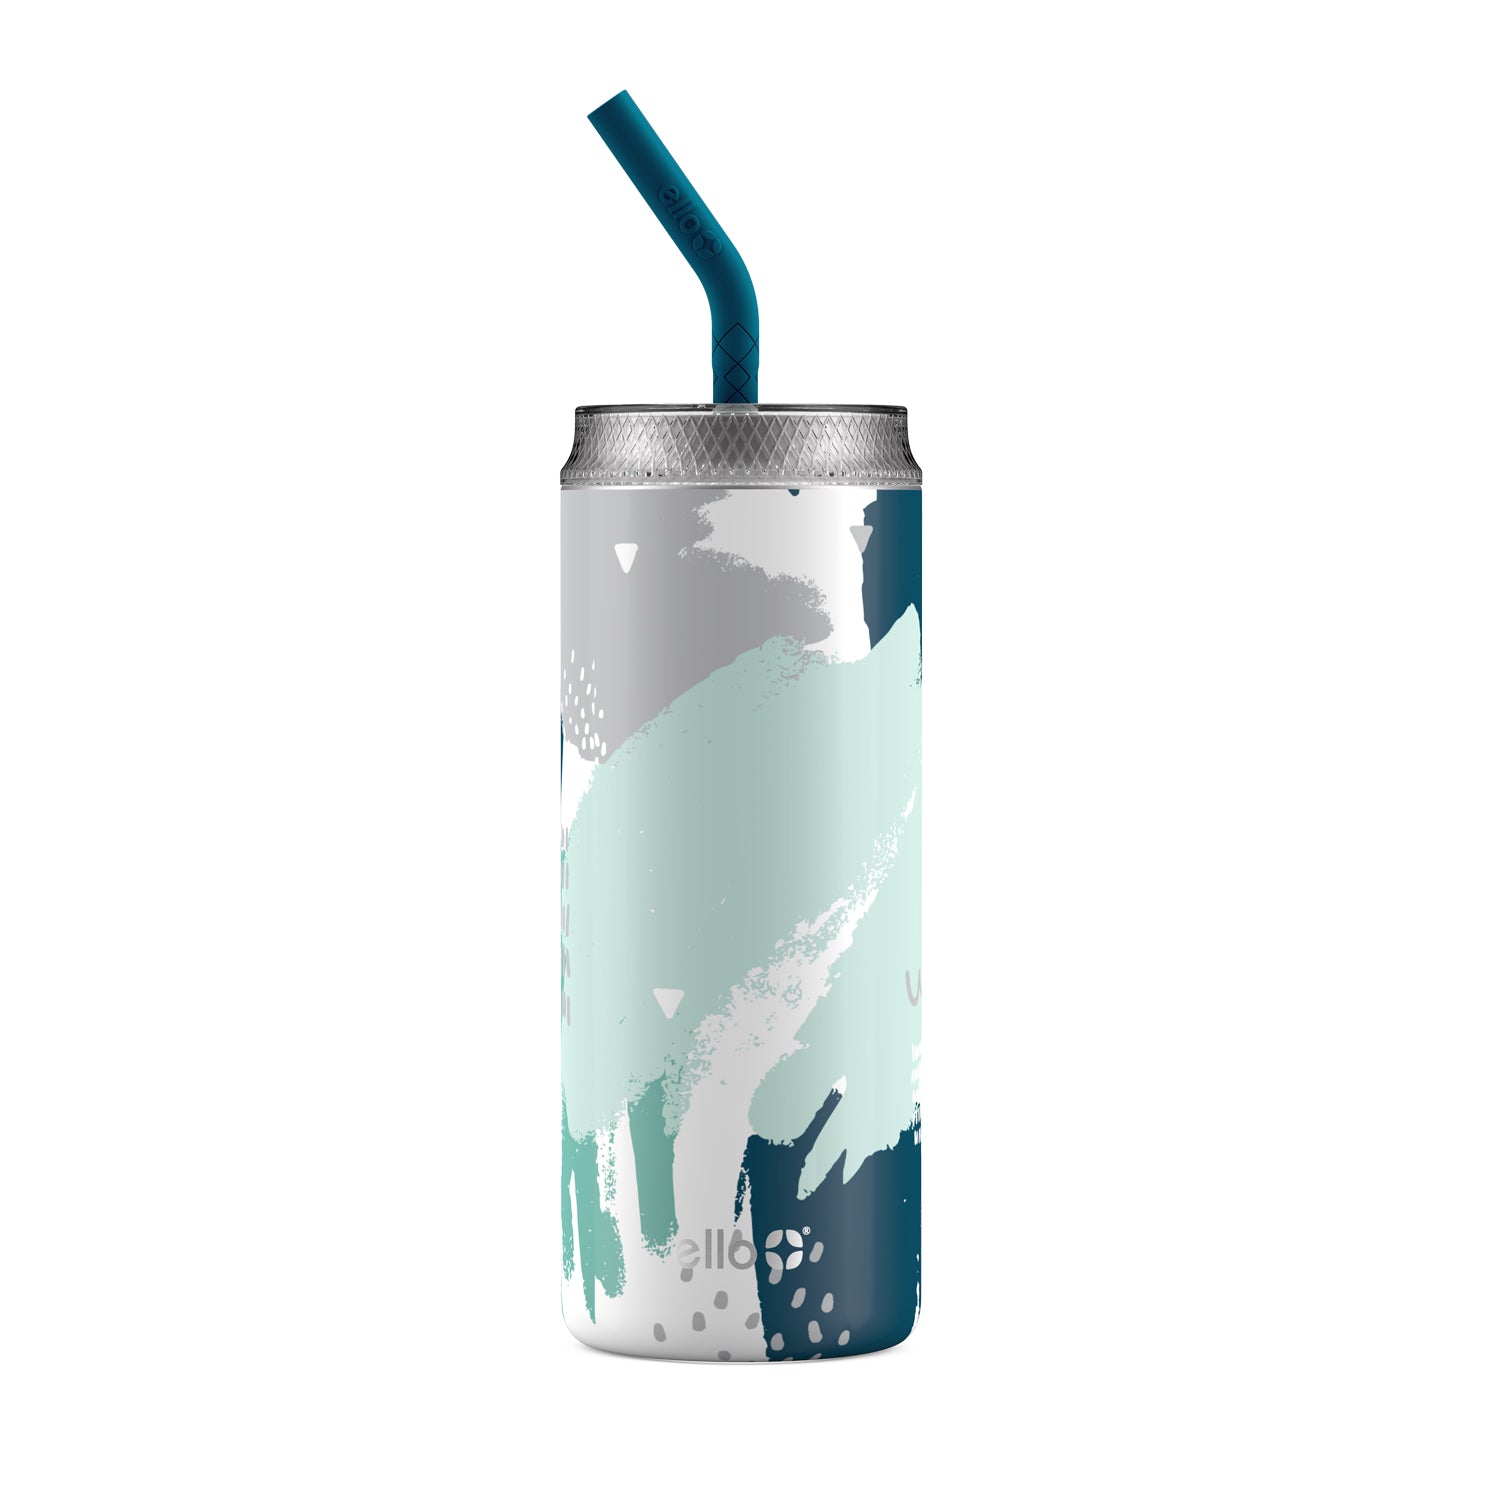 Ello Beacon Vacuum Insulated Stainless Steel Tumbler with Slider